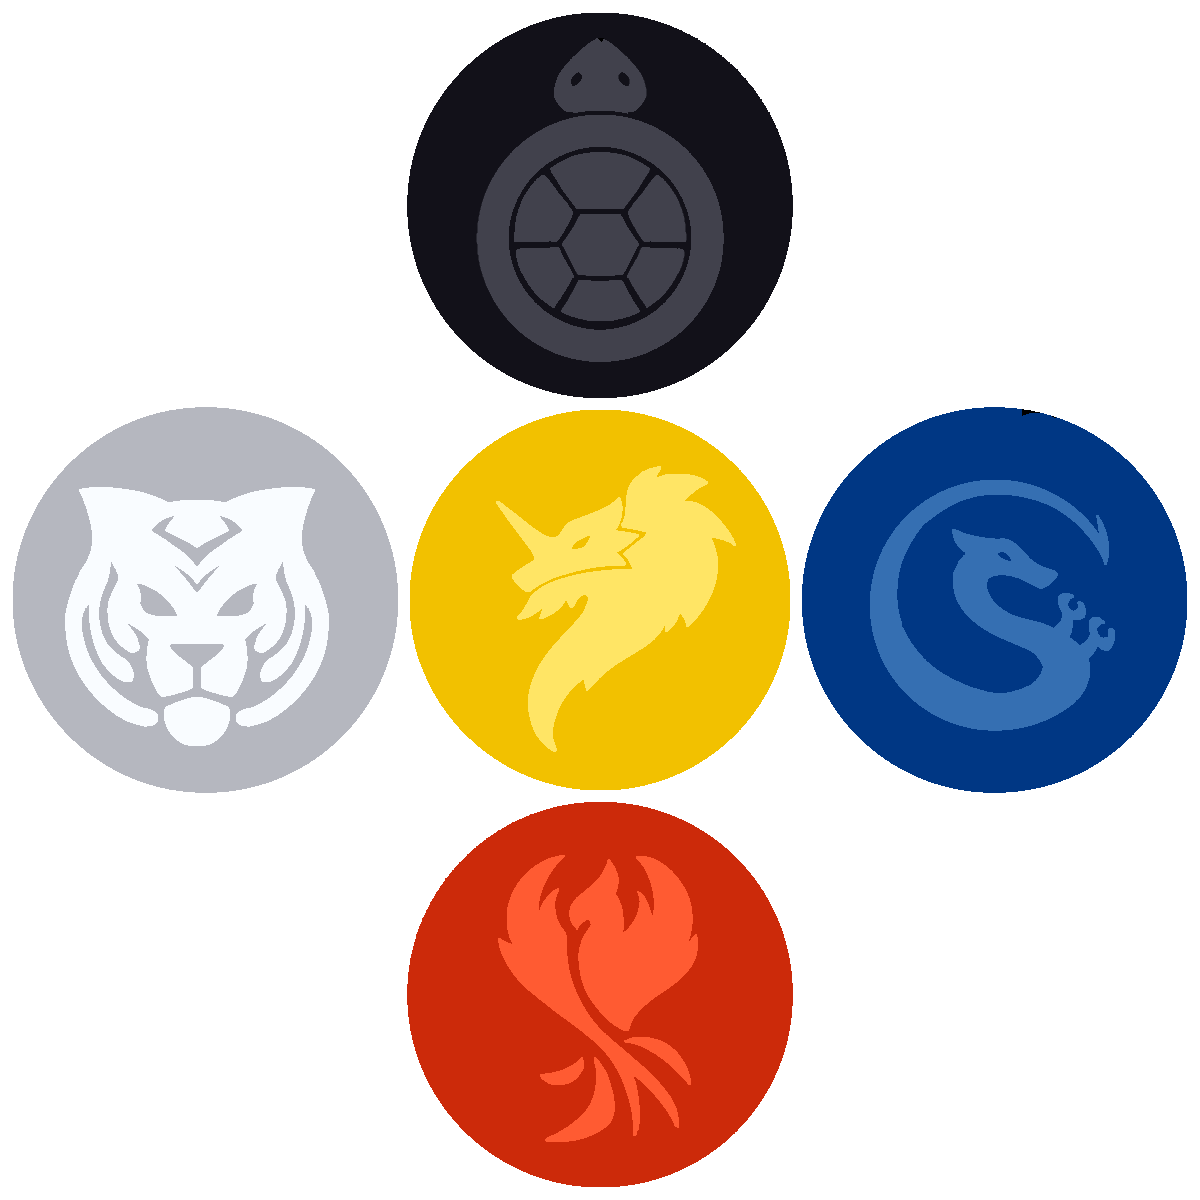 Some Japanese miracle box icons for fun | Fandom